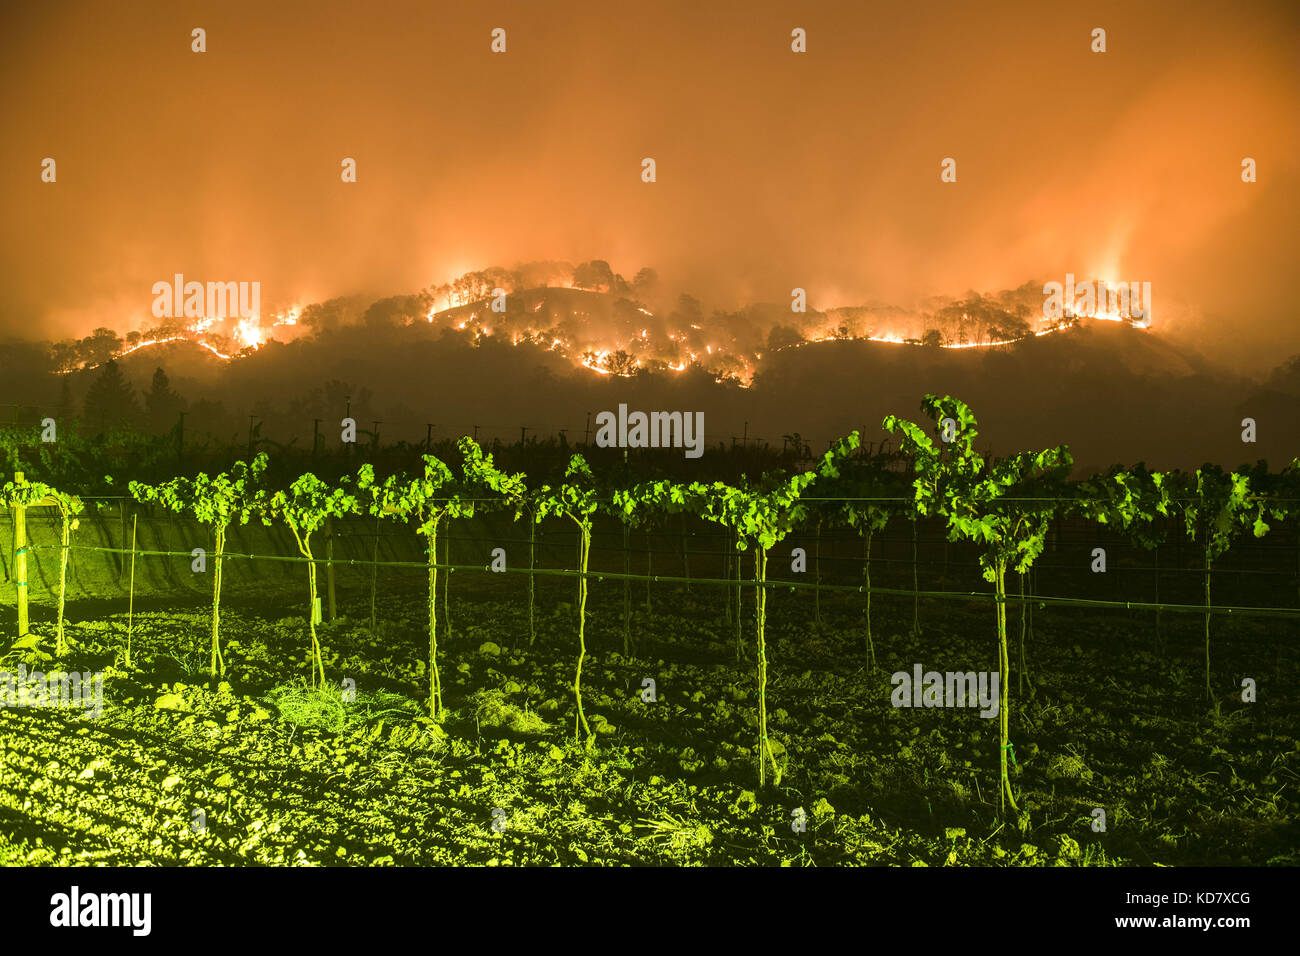 Napa County, USA. 10th Oct, 2017. The Atlas Fire burns east of Woodley Canyon Rd near vineyards late Tuesday evening in Napa County, CA.Long exposure image. The Atlas Fire burns in Napa and Solano Counties Monday evening October 10th, 2017. The fire was 3% contained and had burned 25,000 acres. Multiple structures were destroyed as crews battled strong winds and tinder dry vegetation after multiple fires burned in the area. Credit: Stuart Palley/ZUMA Wire/Alamy Live News Stock Photo